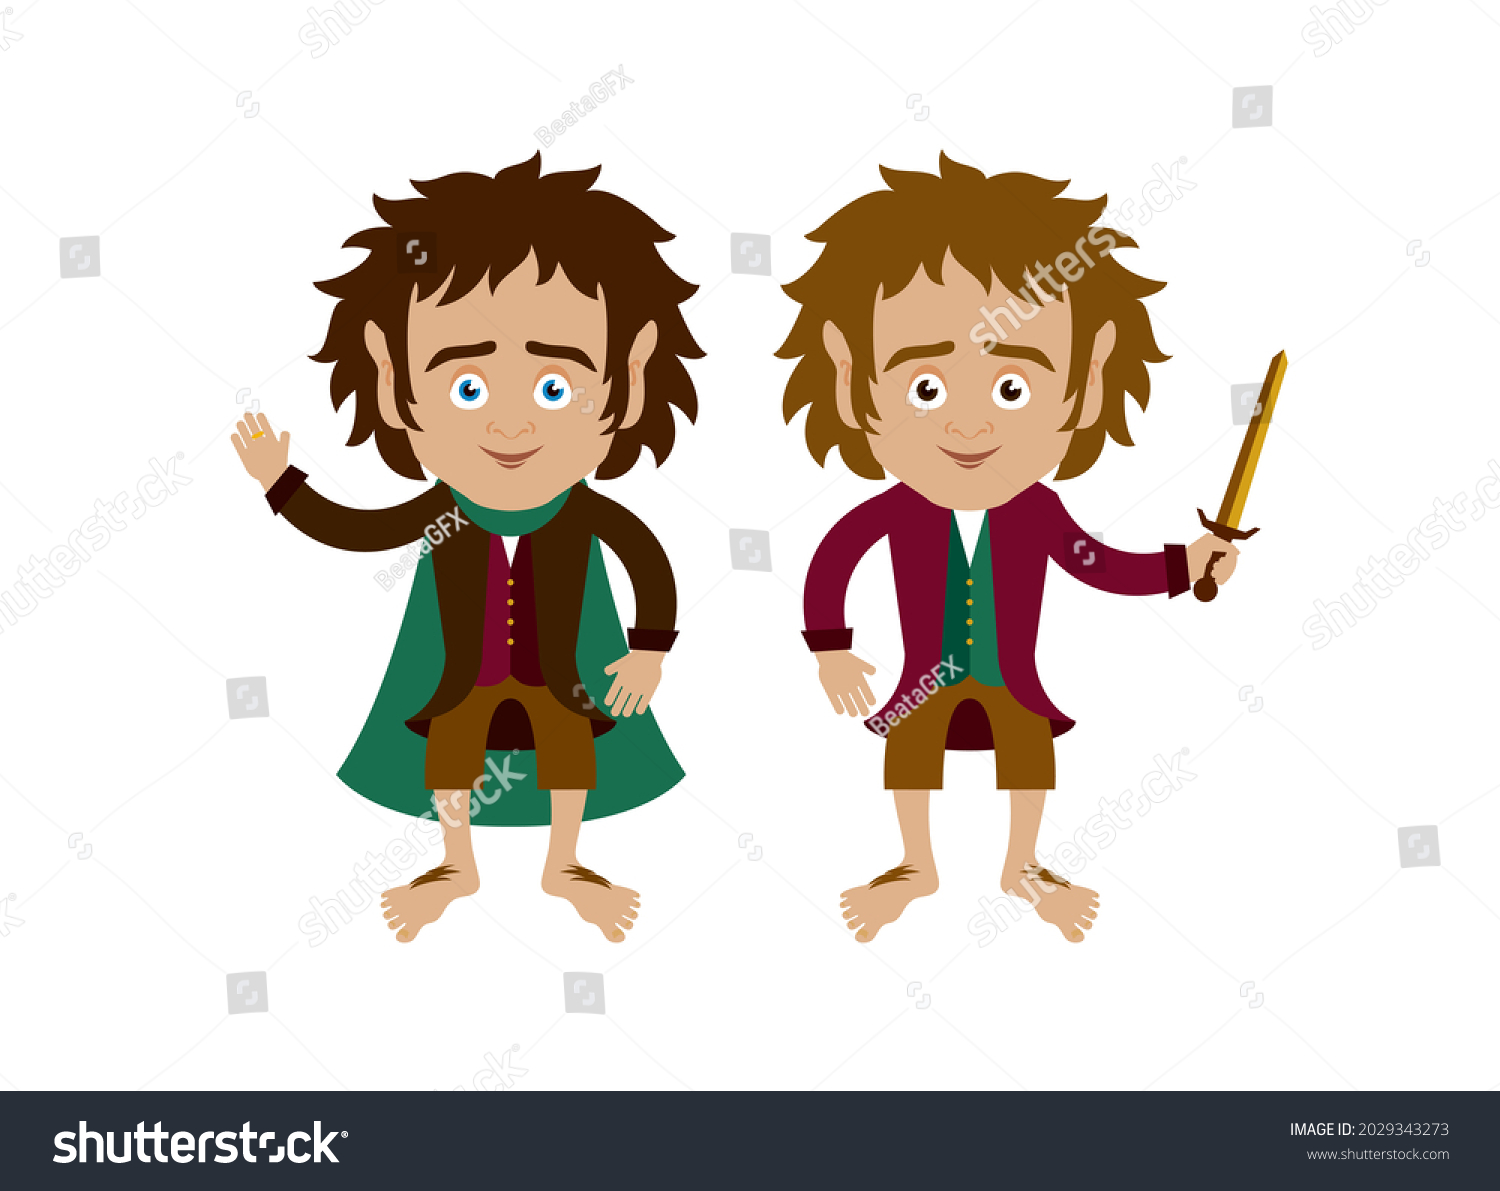 SVG of Hobbits Bilbo and Frodo Baggins, Fictional characters icon set vector. Two cute hobbits icon isolated on a white background. Bilbo and Frodo cartoon character svg